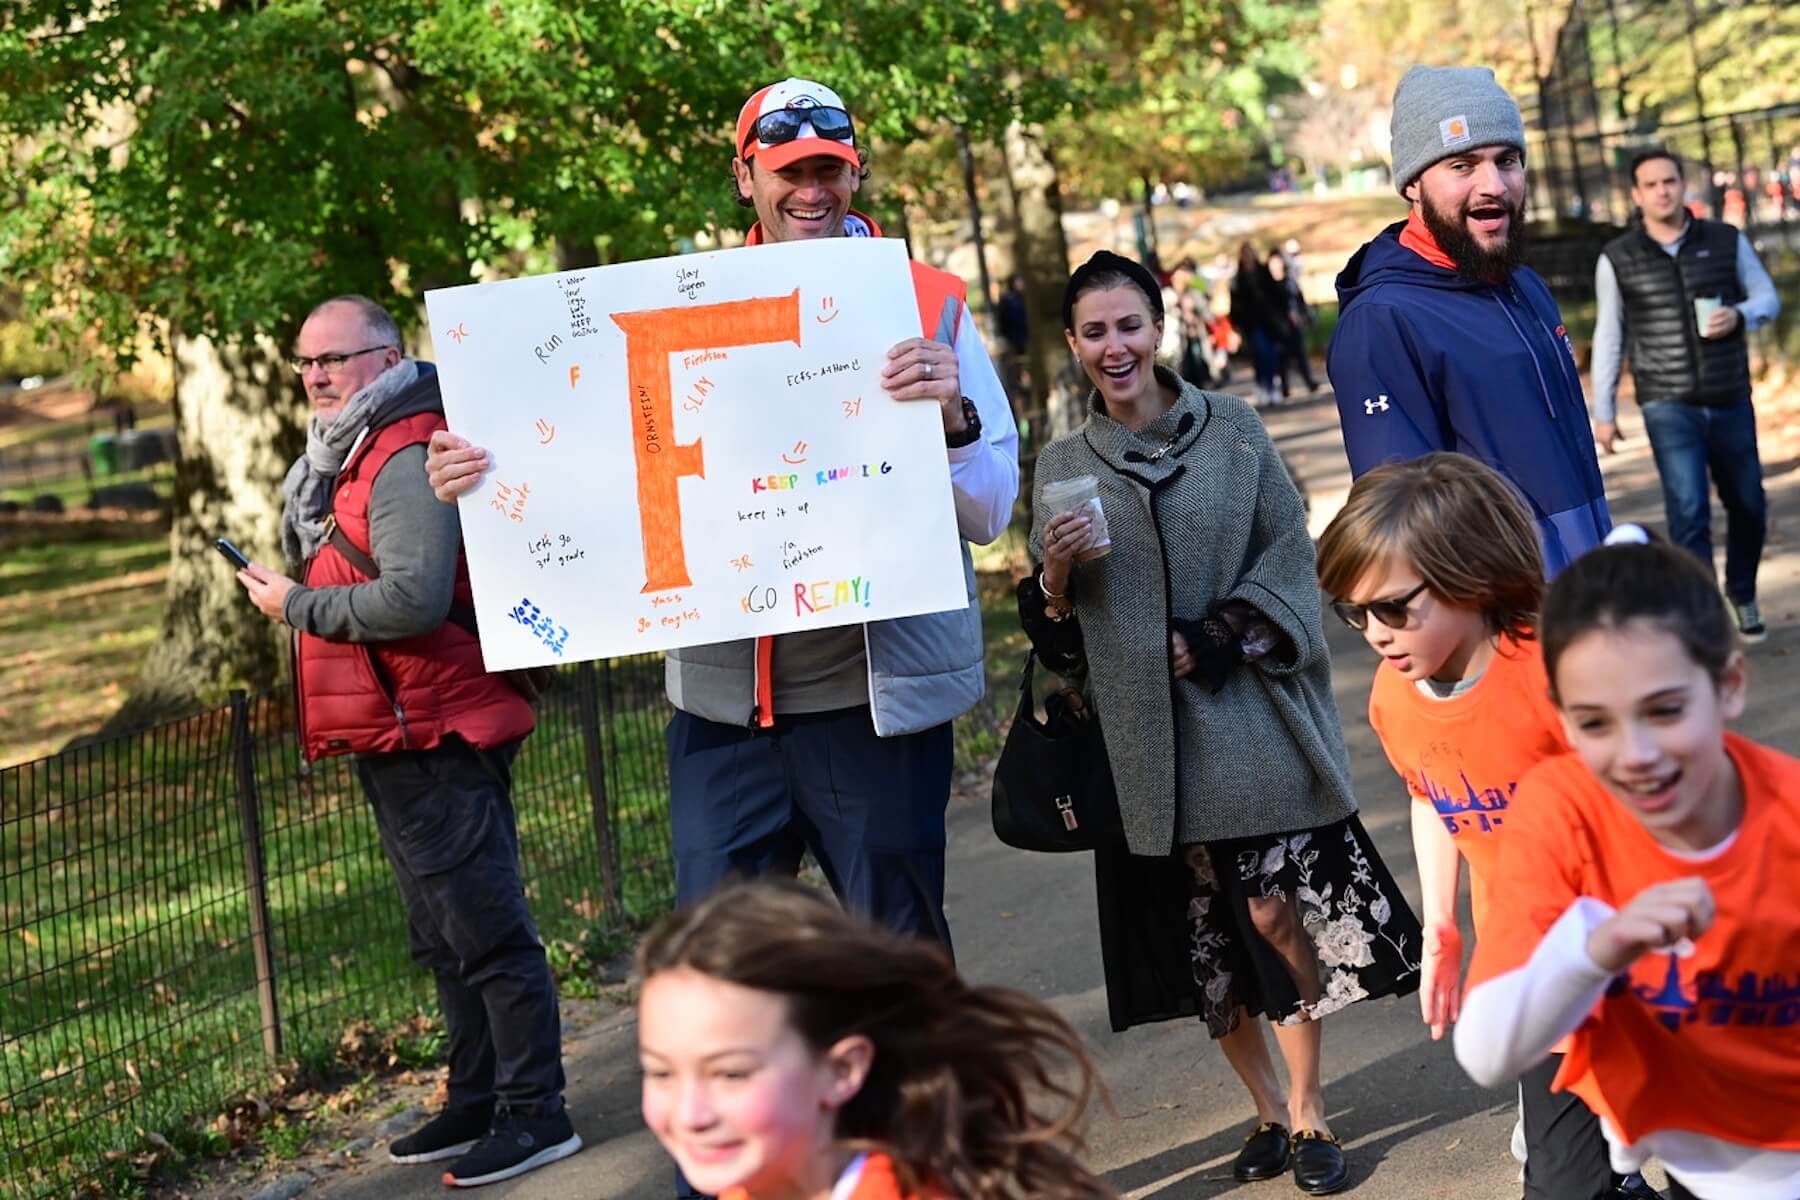 Two ECFS parents stand holding sign that reads has an orange Fieldston "F" on it. Students in the foreground smile and run.